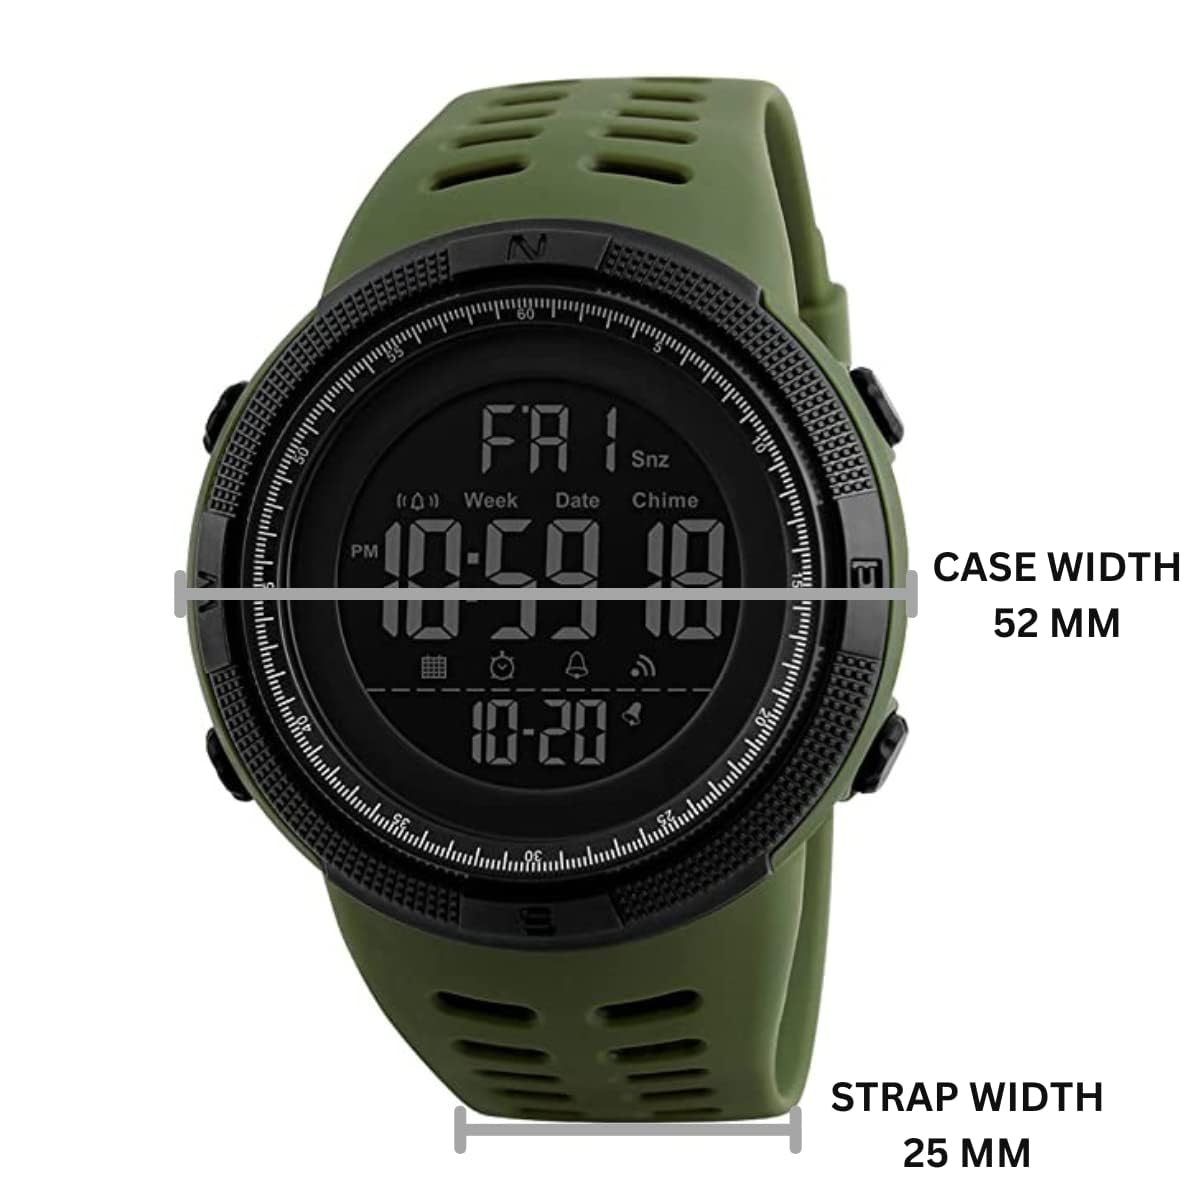 ON TIME OCTUS Digital Boy's and Men's Watch DIGI-010 (Black Dial Green Color Strap)